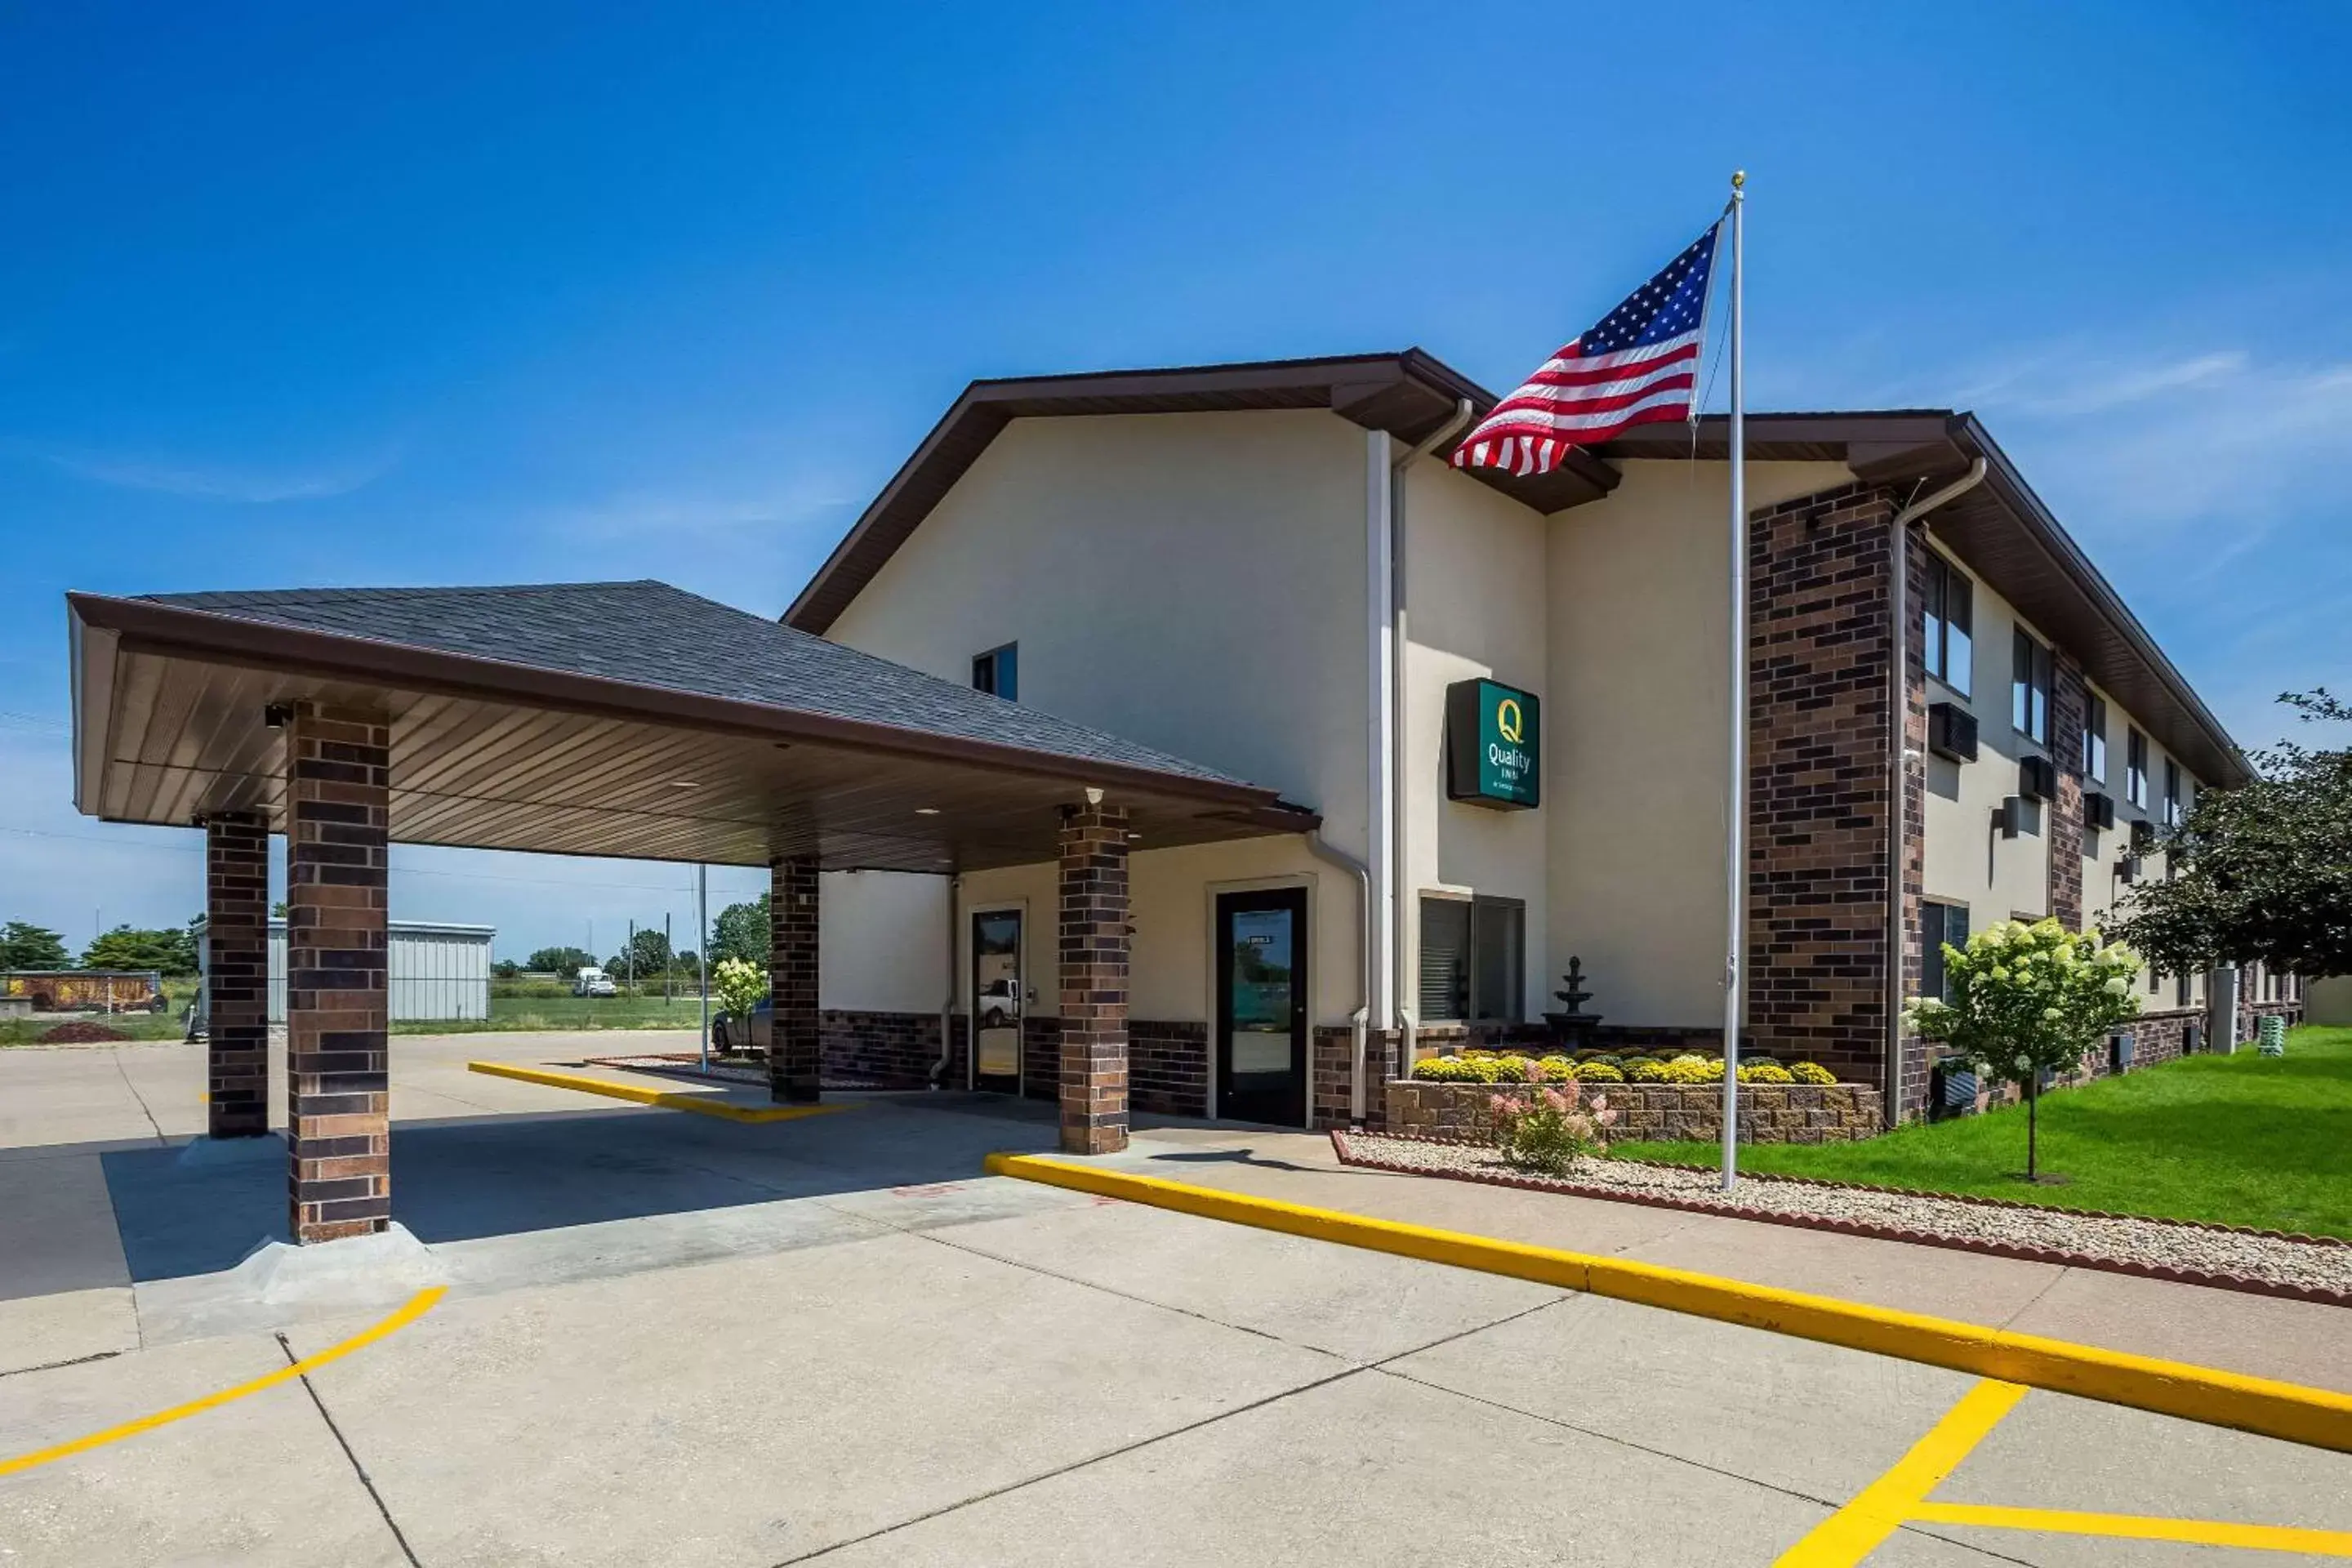 Property Building in Quality Inn Galesburg near US Highway 34 and I-74